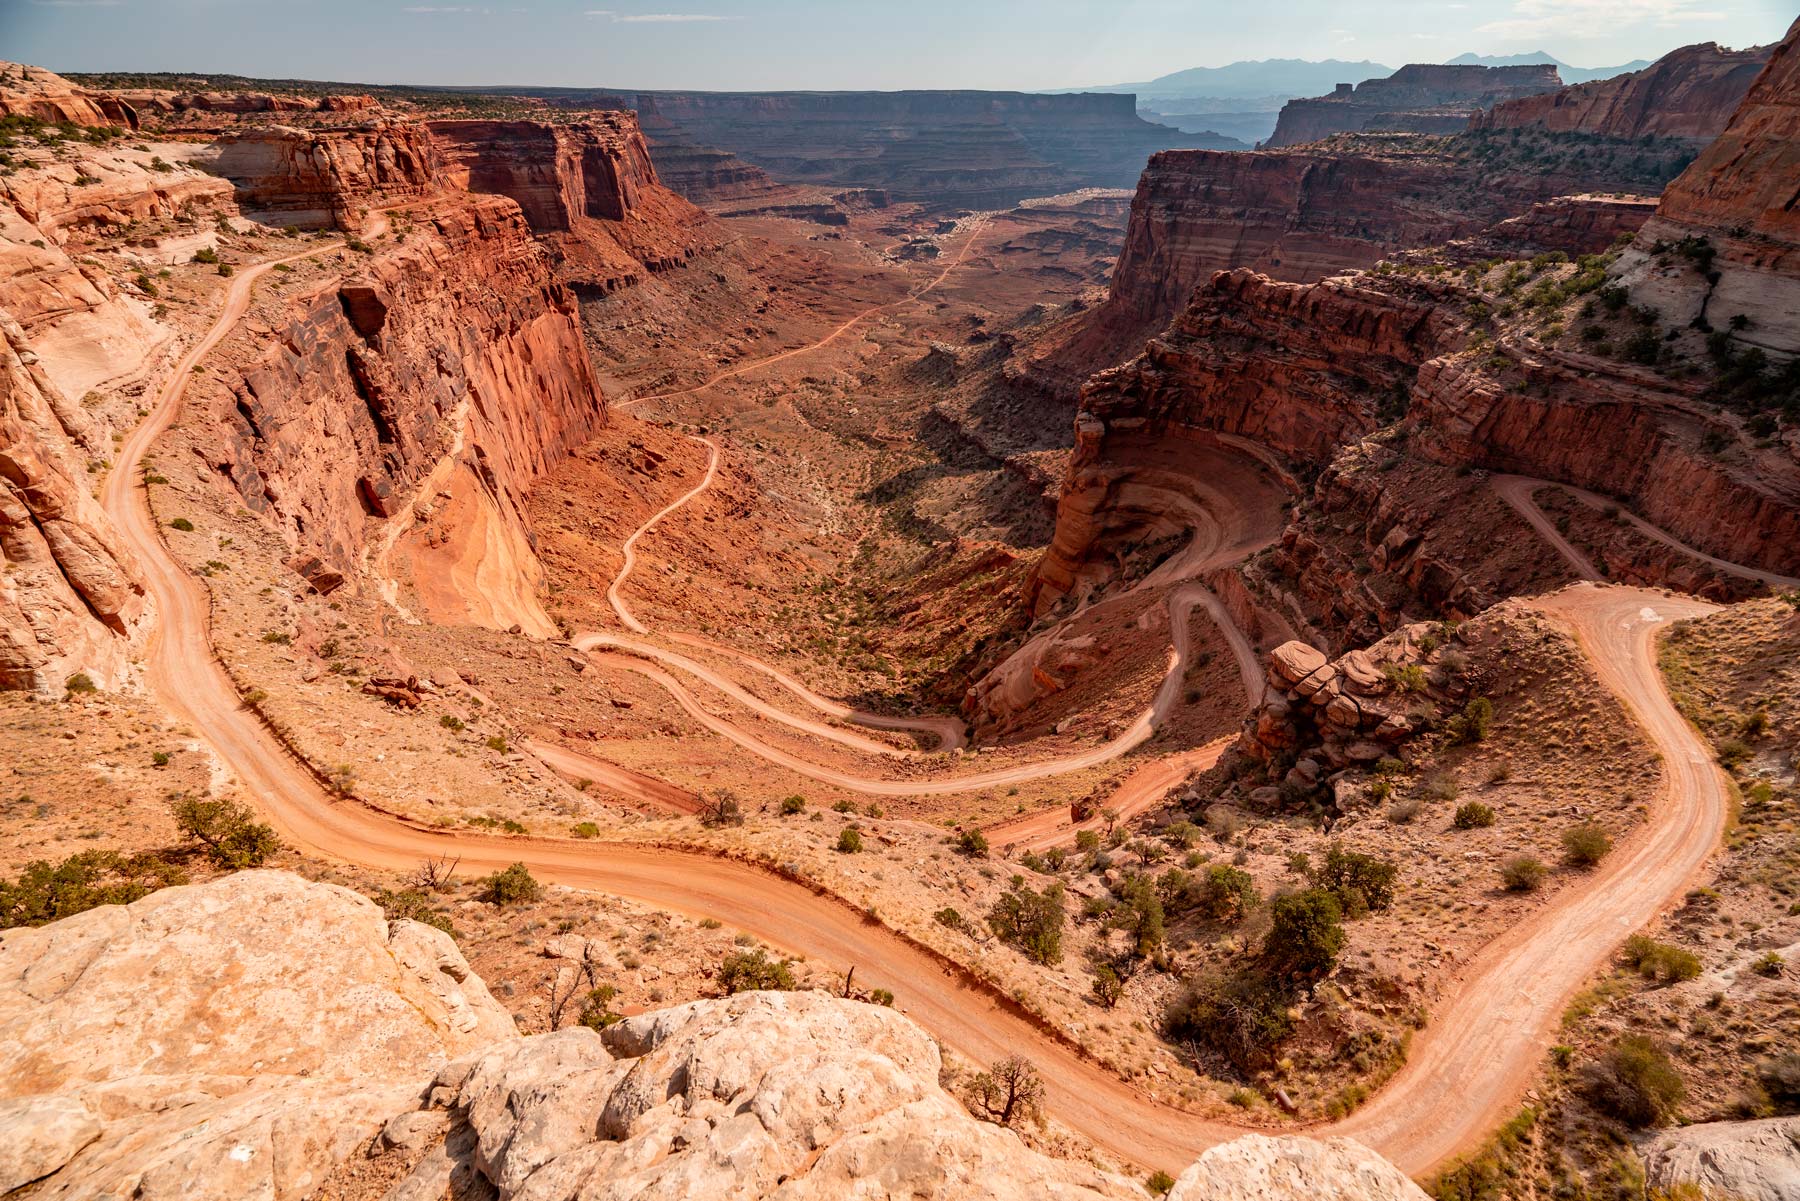 A trail weaves down a rust colored mountain in Canyonlands National Park.